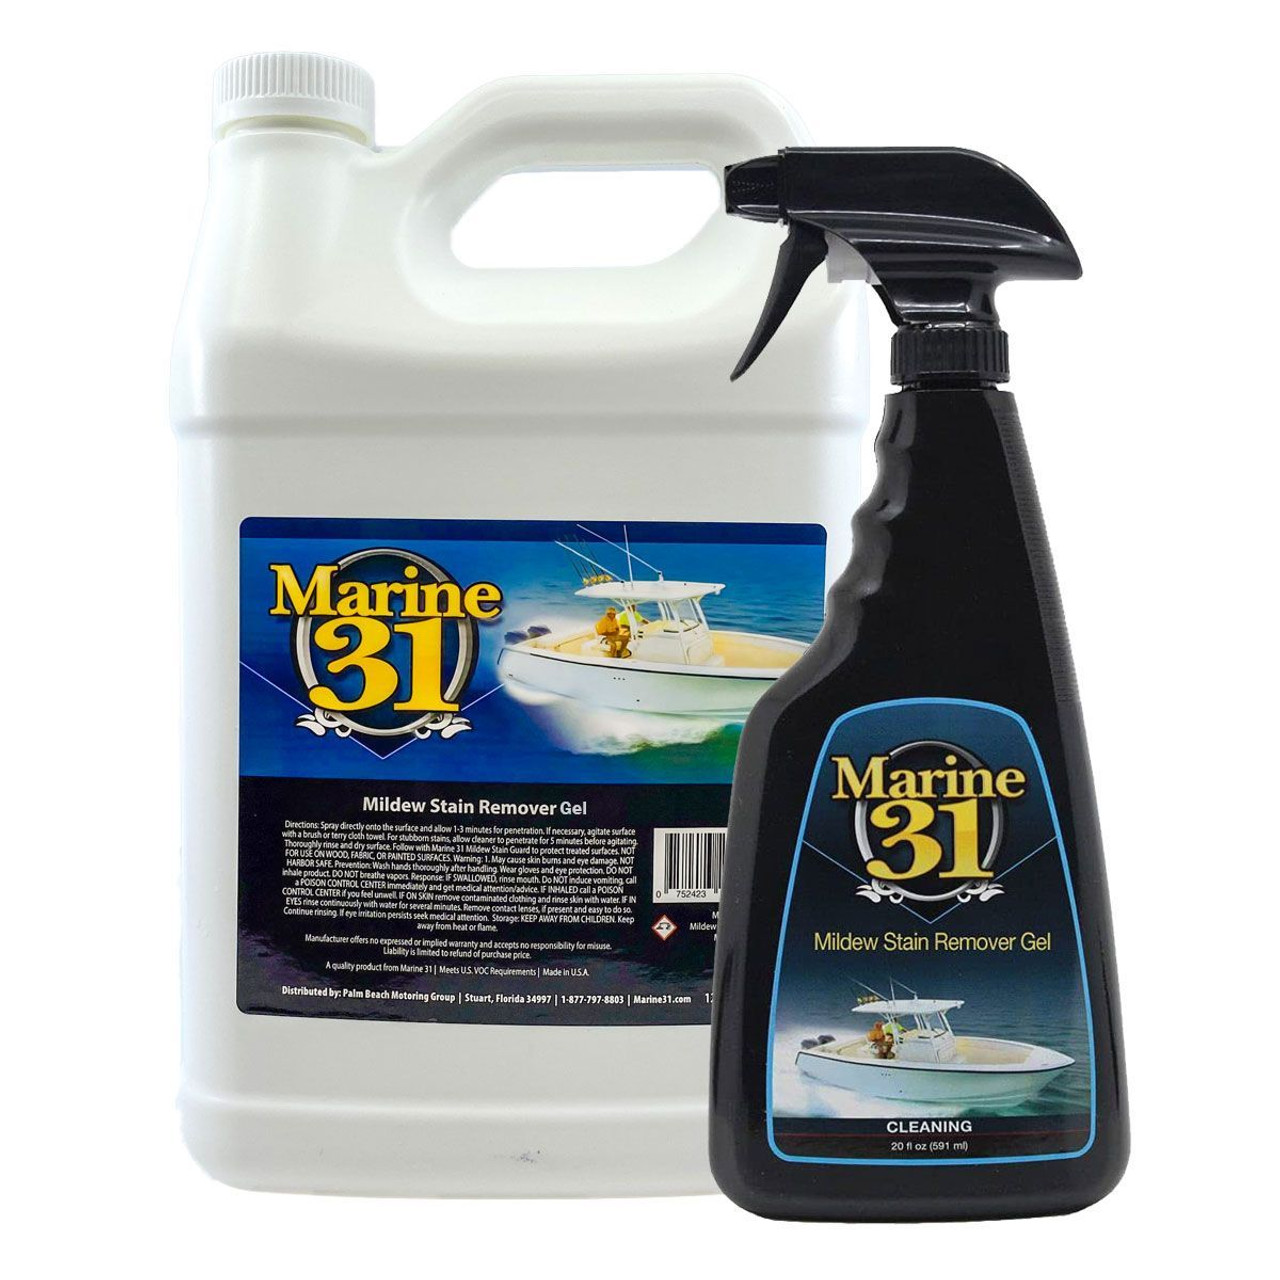 Marine 31 Mildew Stain Remover Gel Gallon and 20 oz.